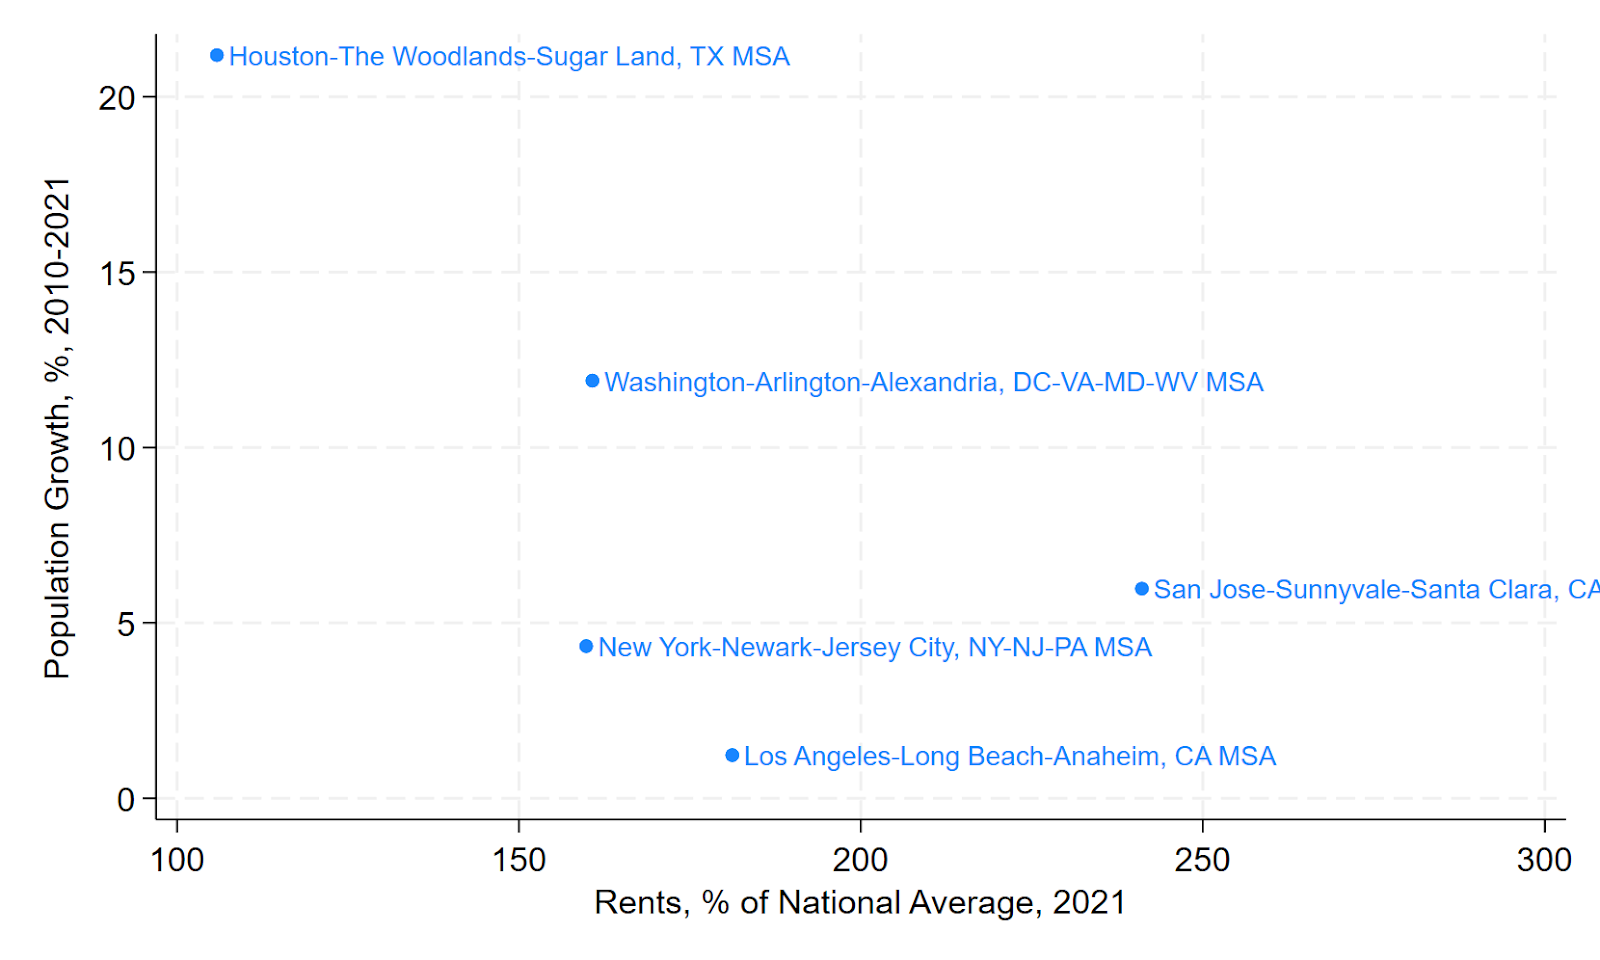 Houston has grown much faster than DC, LA, NYC, and San Jose, but rents are also much lower there.